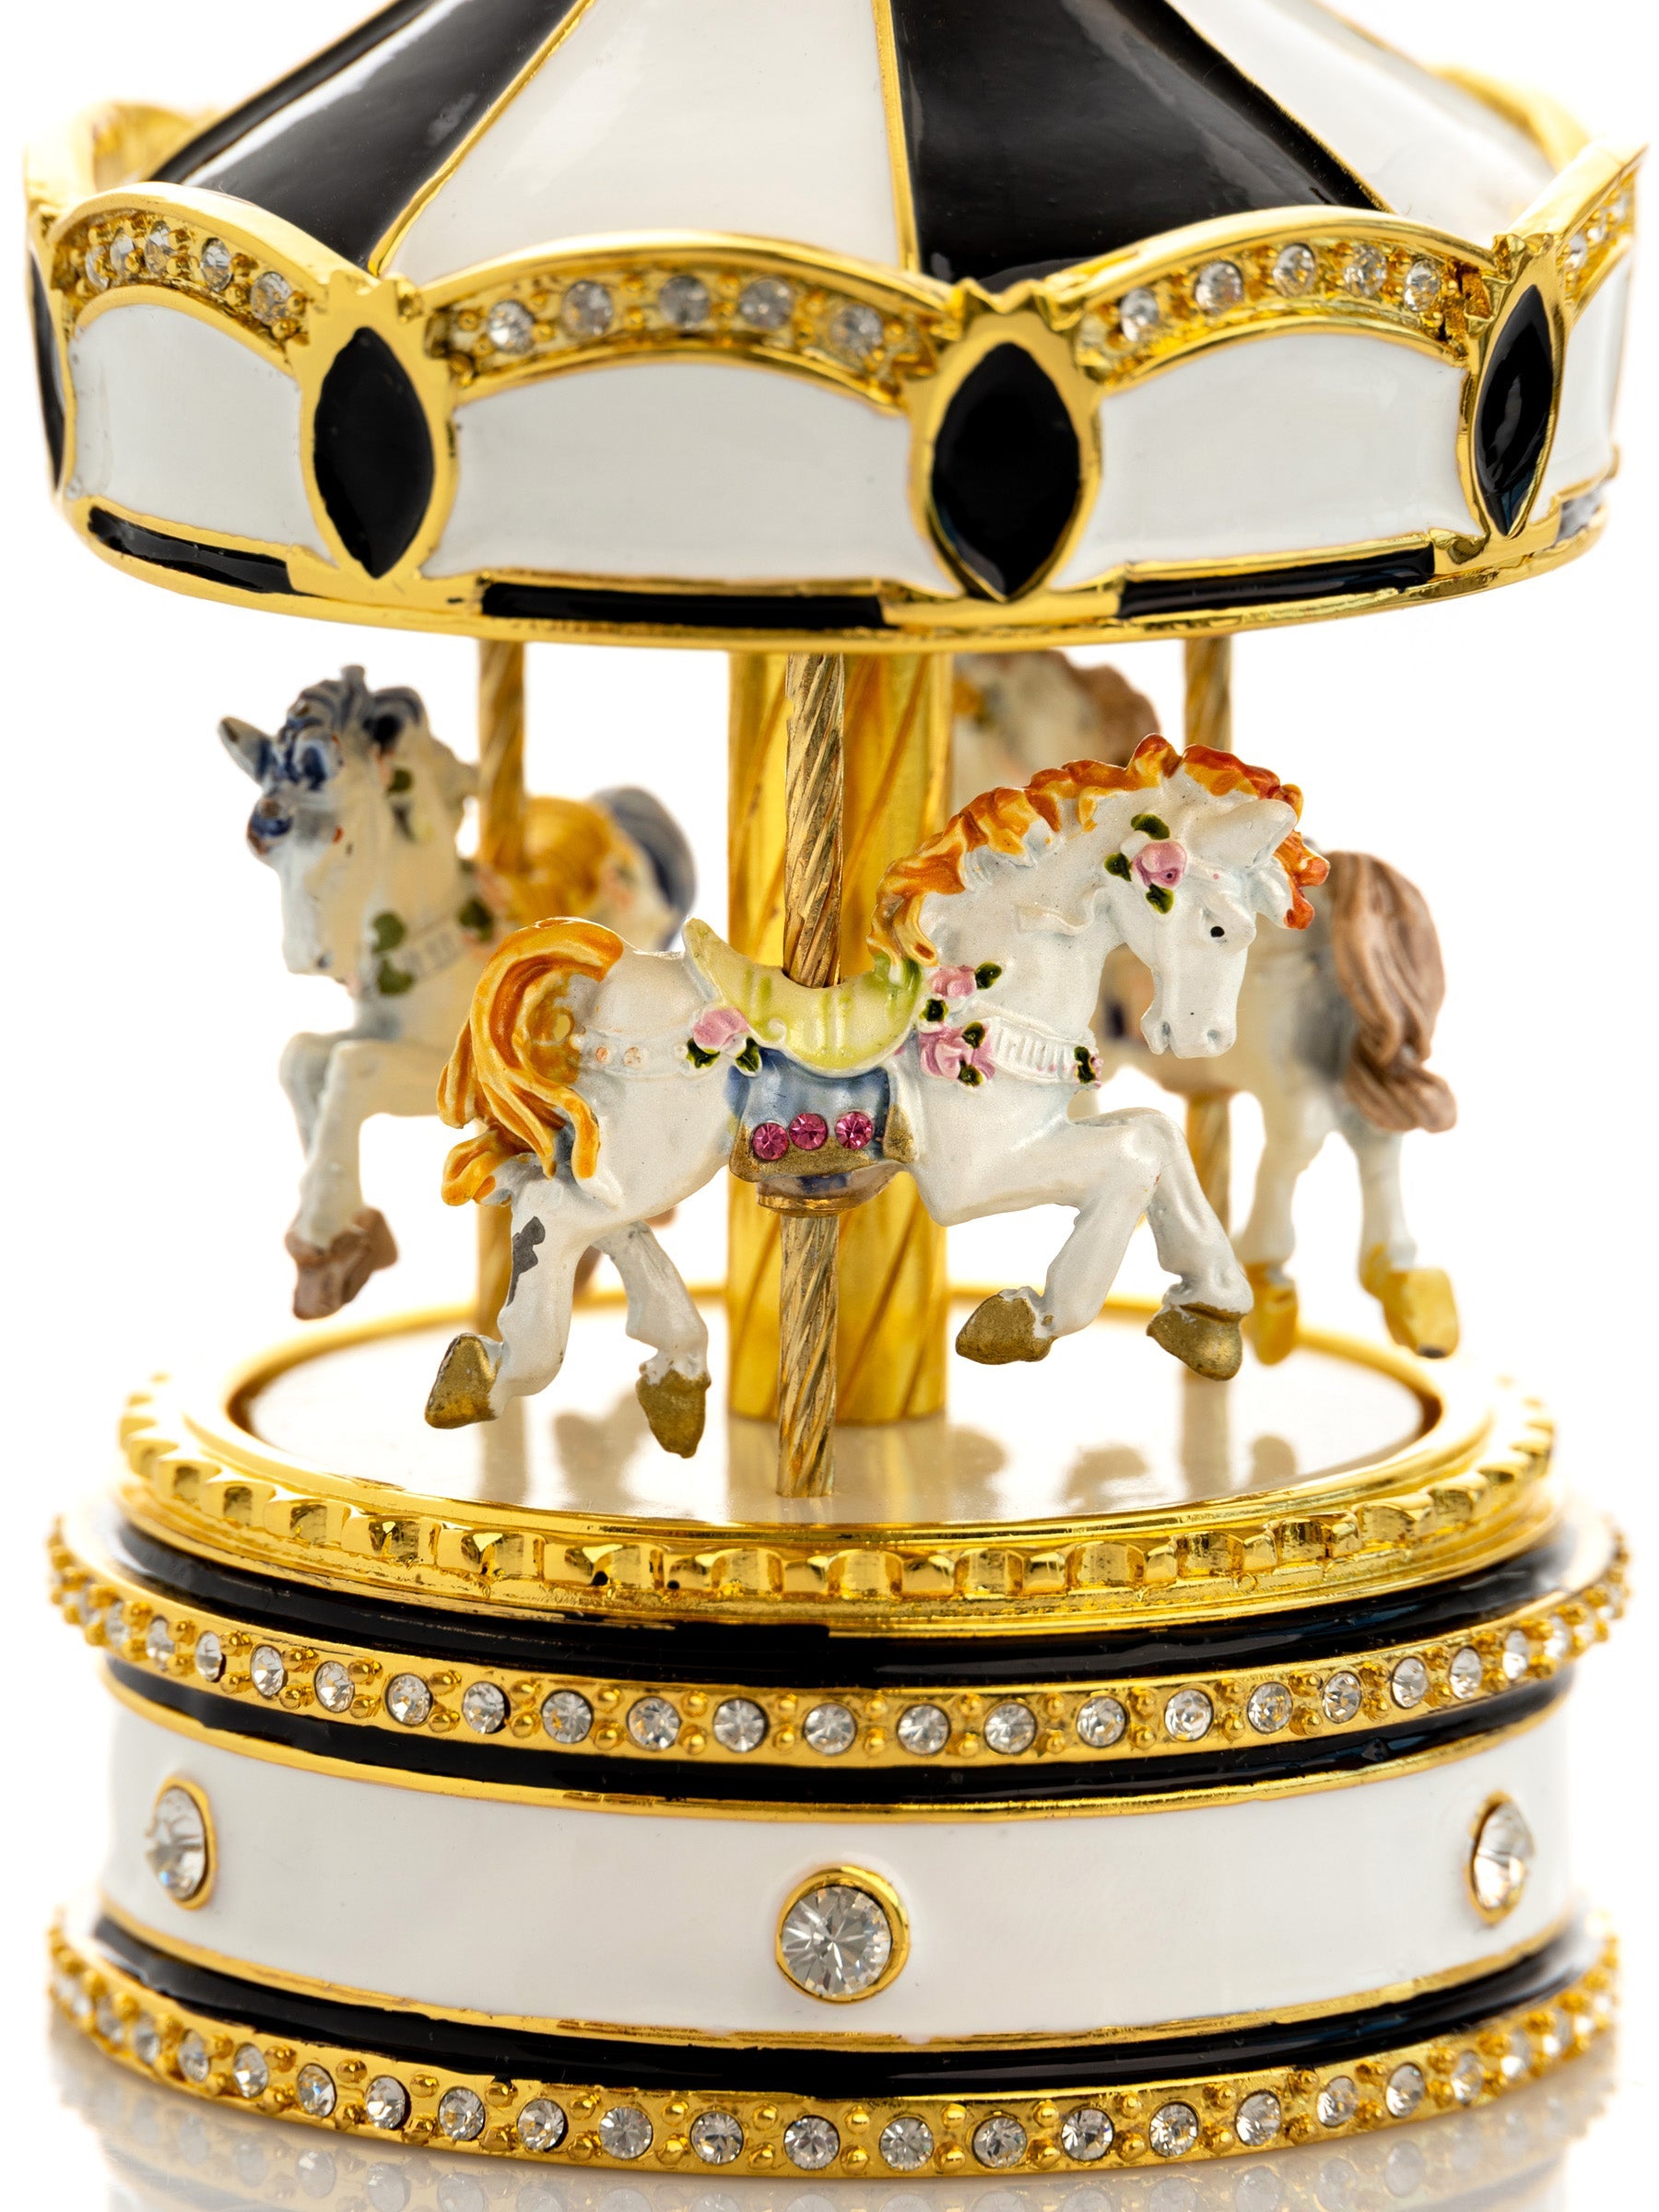 Black Musical Carousel with Spinning Royal Horses-3